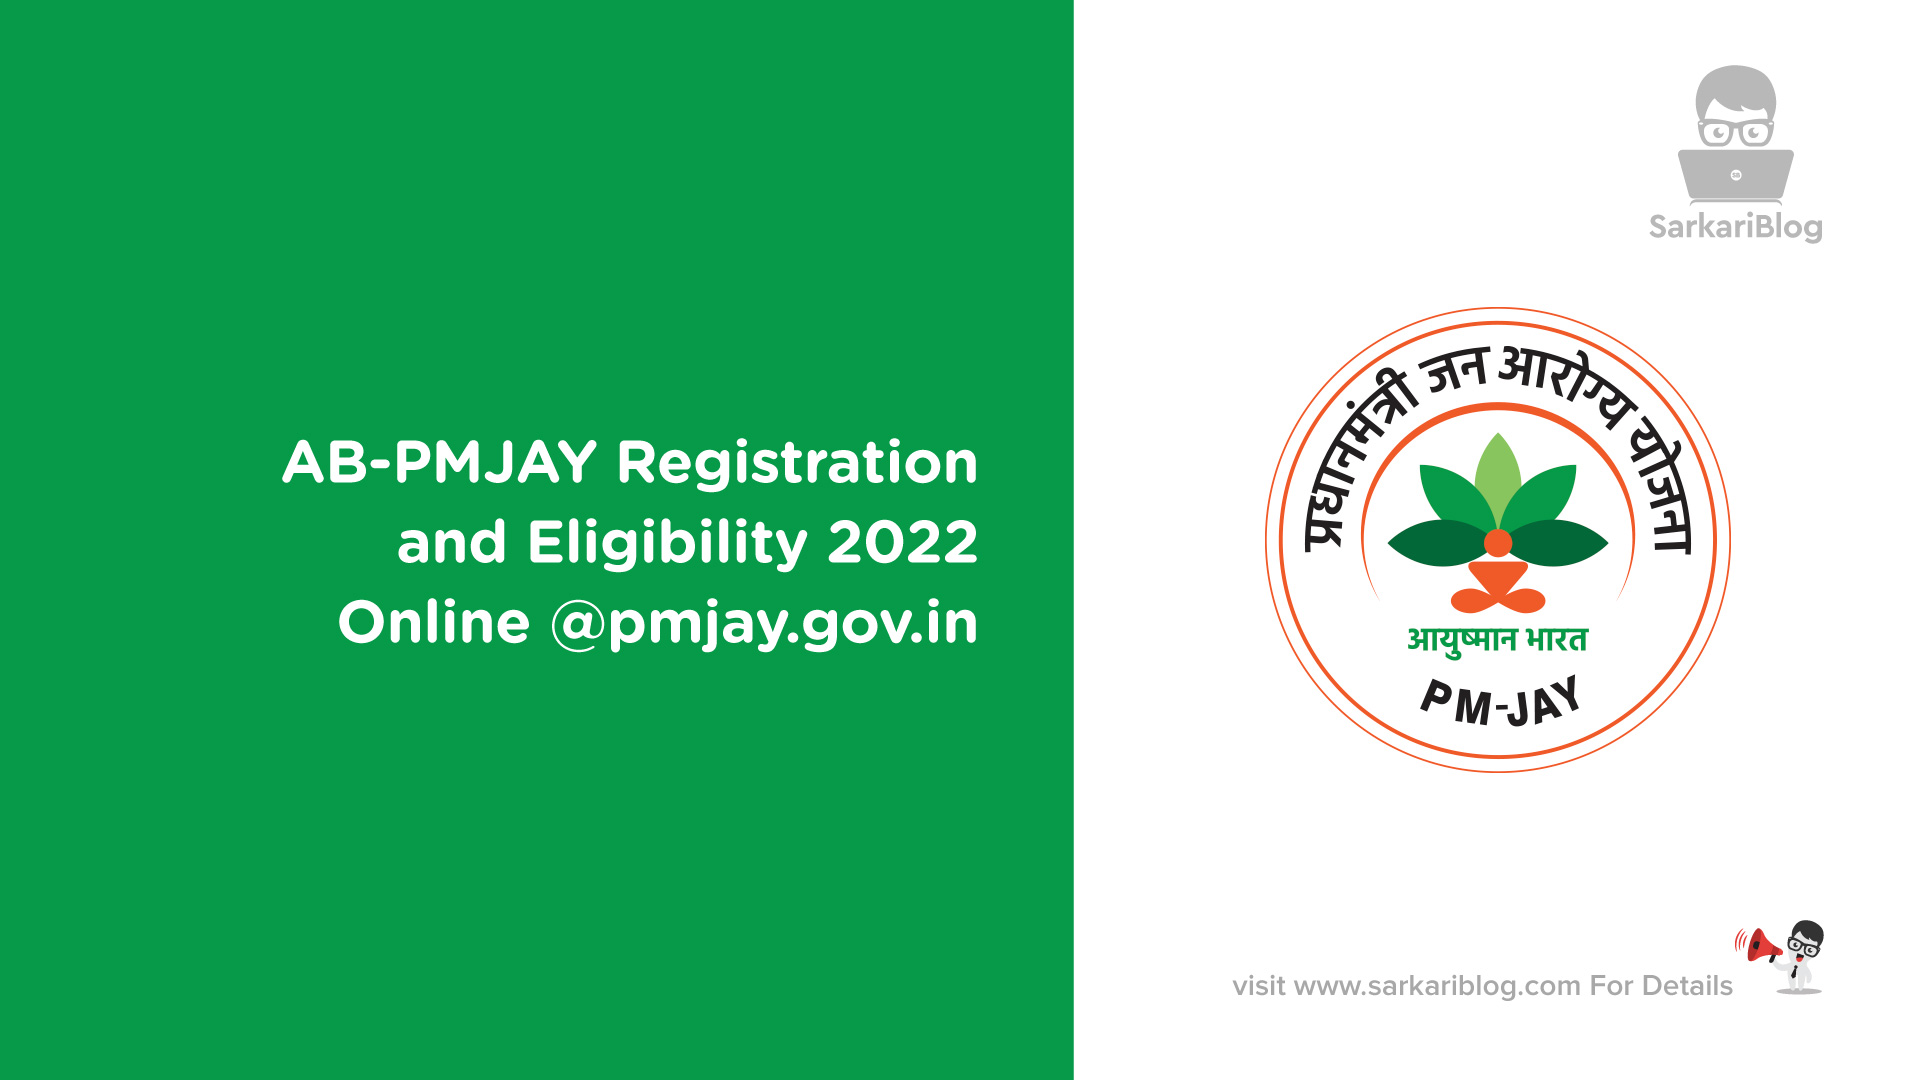 AB-PMJAY Registration and Eligibility